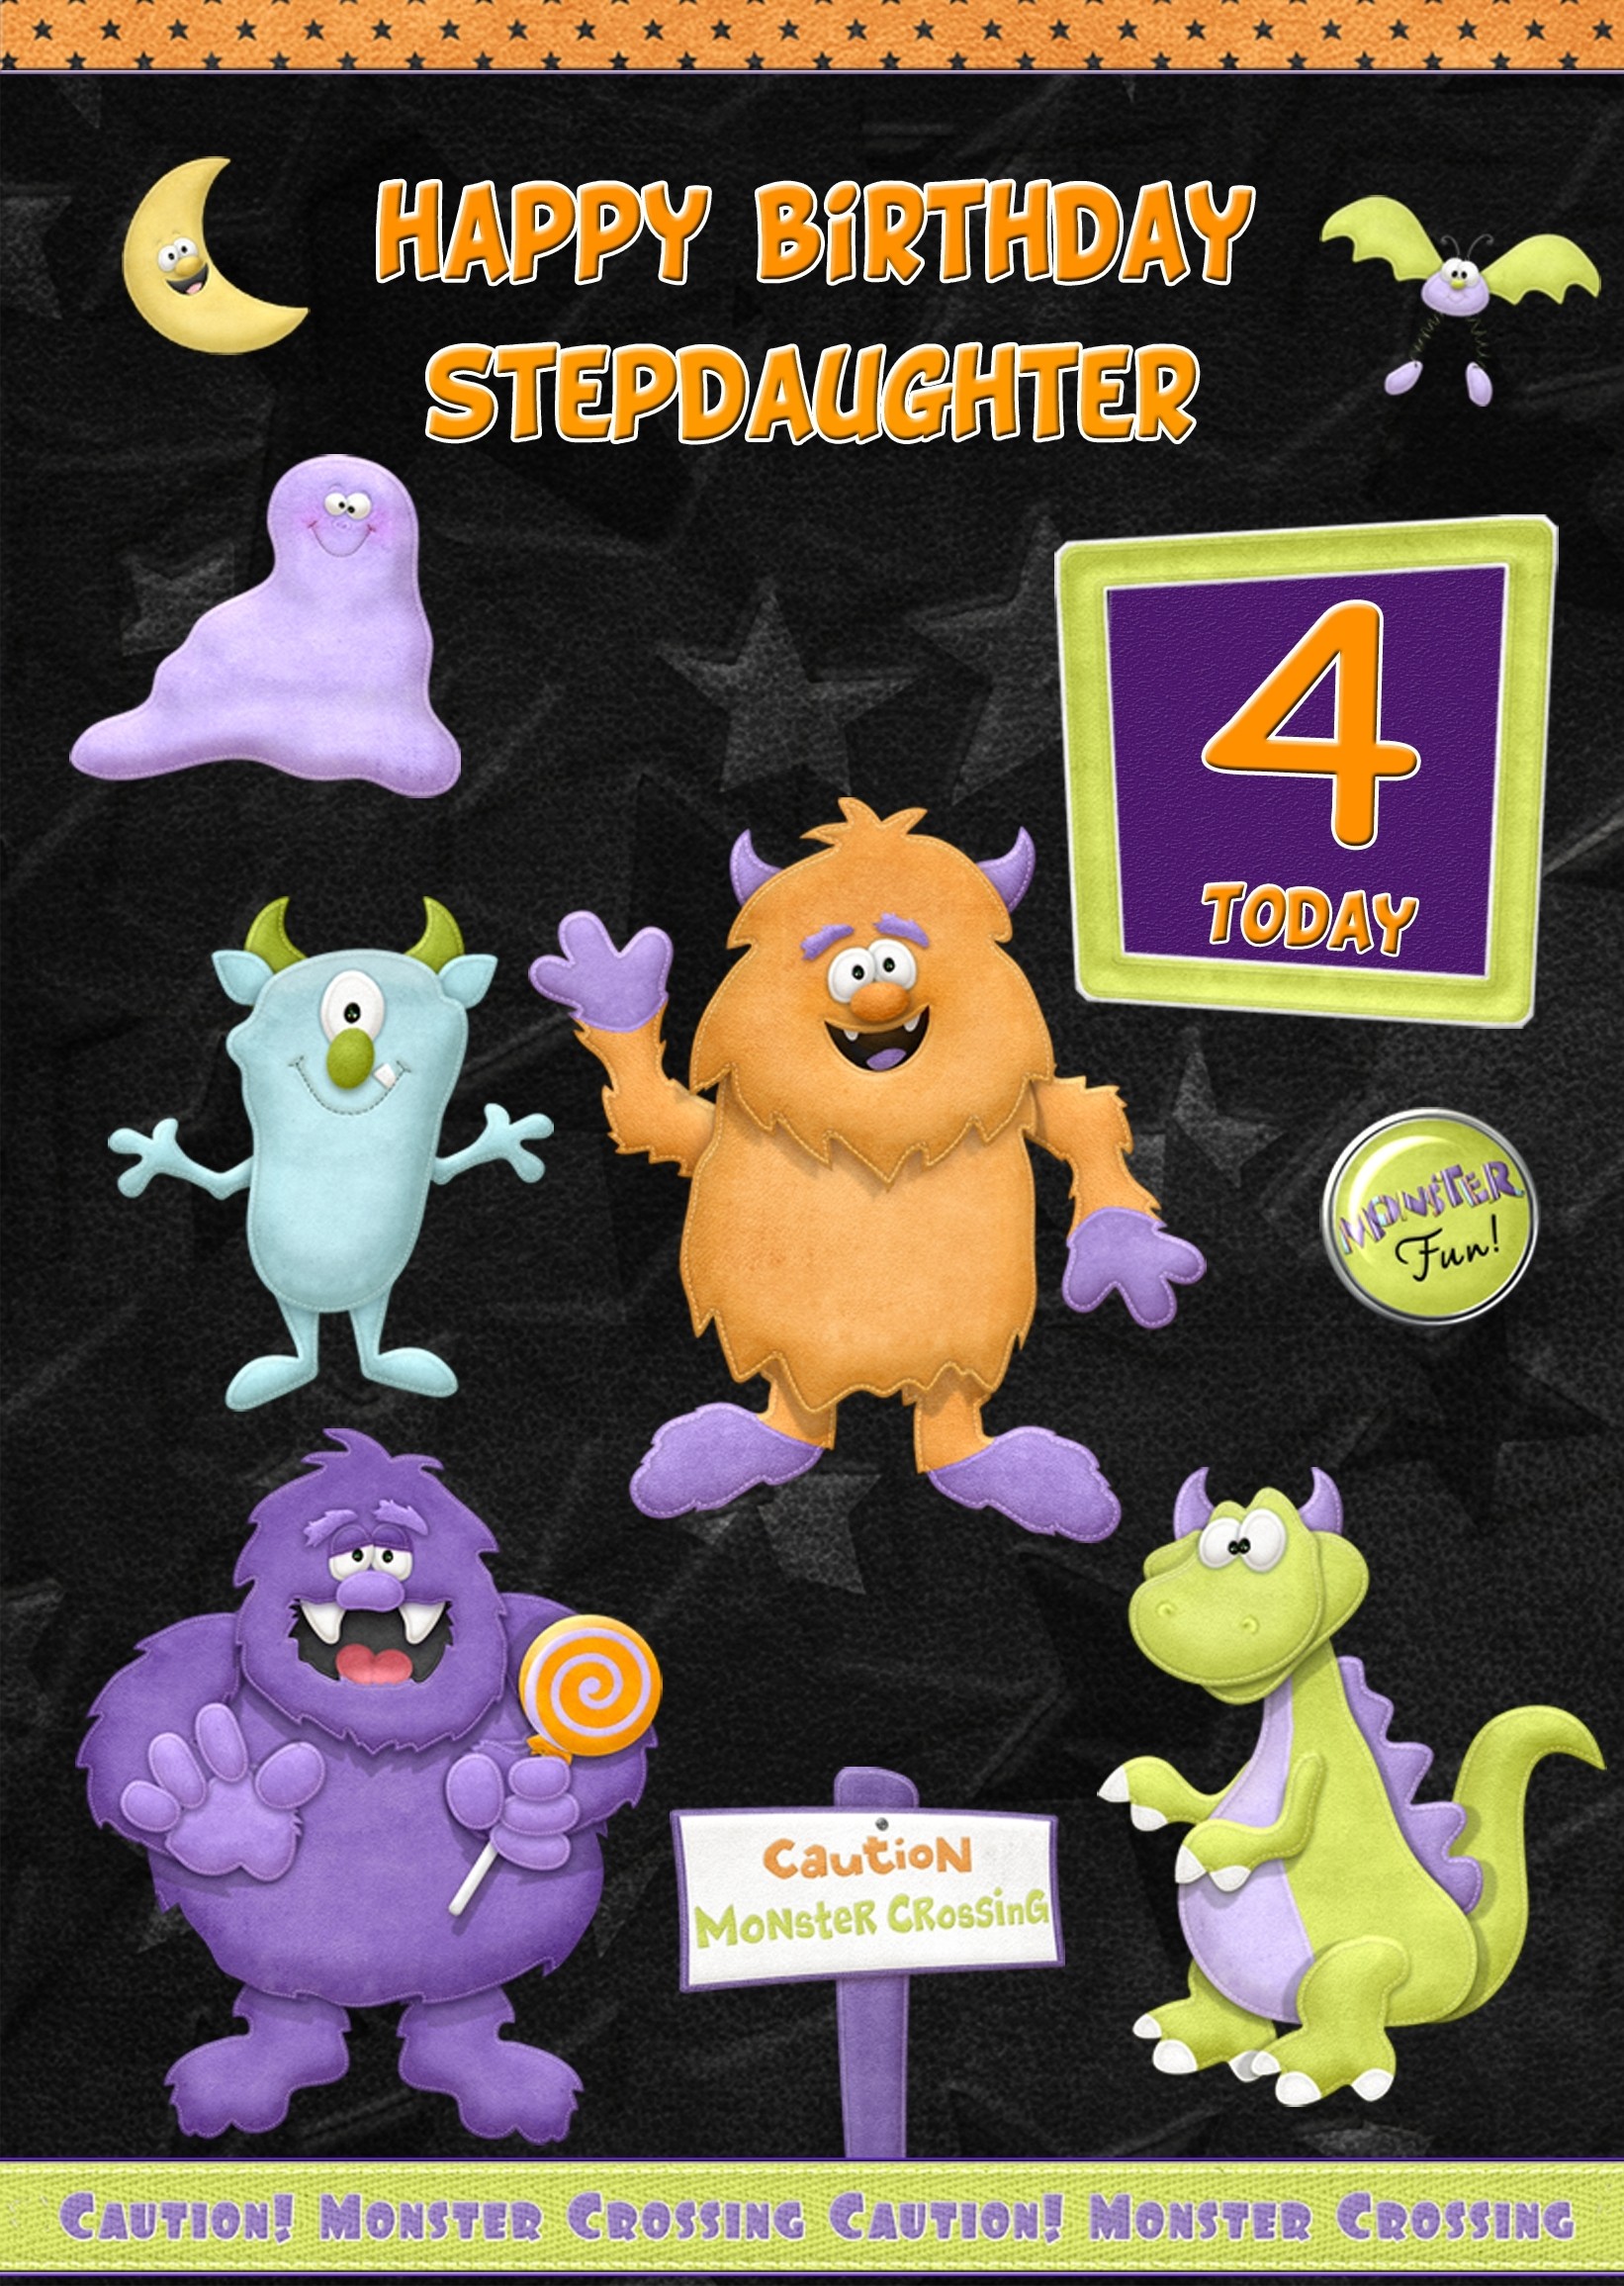 Kids 4th Birthday Funny Monster Cartoon Card for Stepdaughter